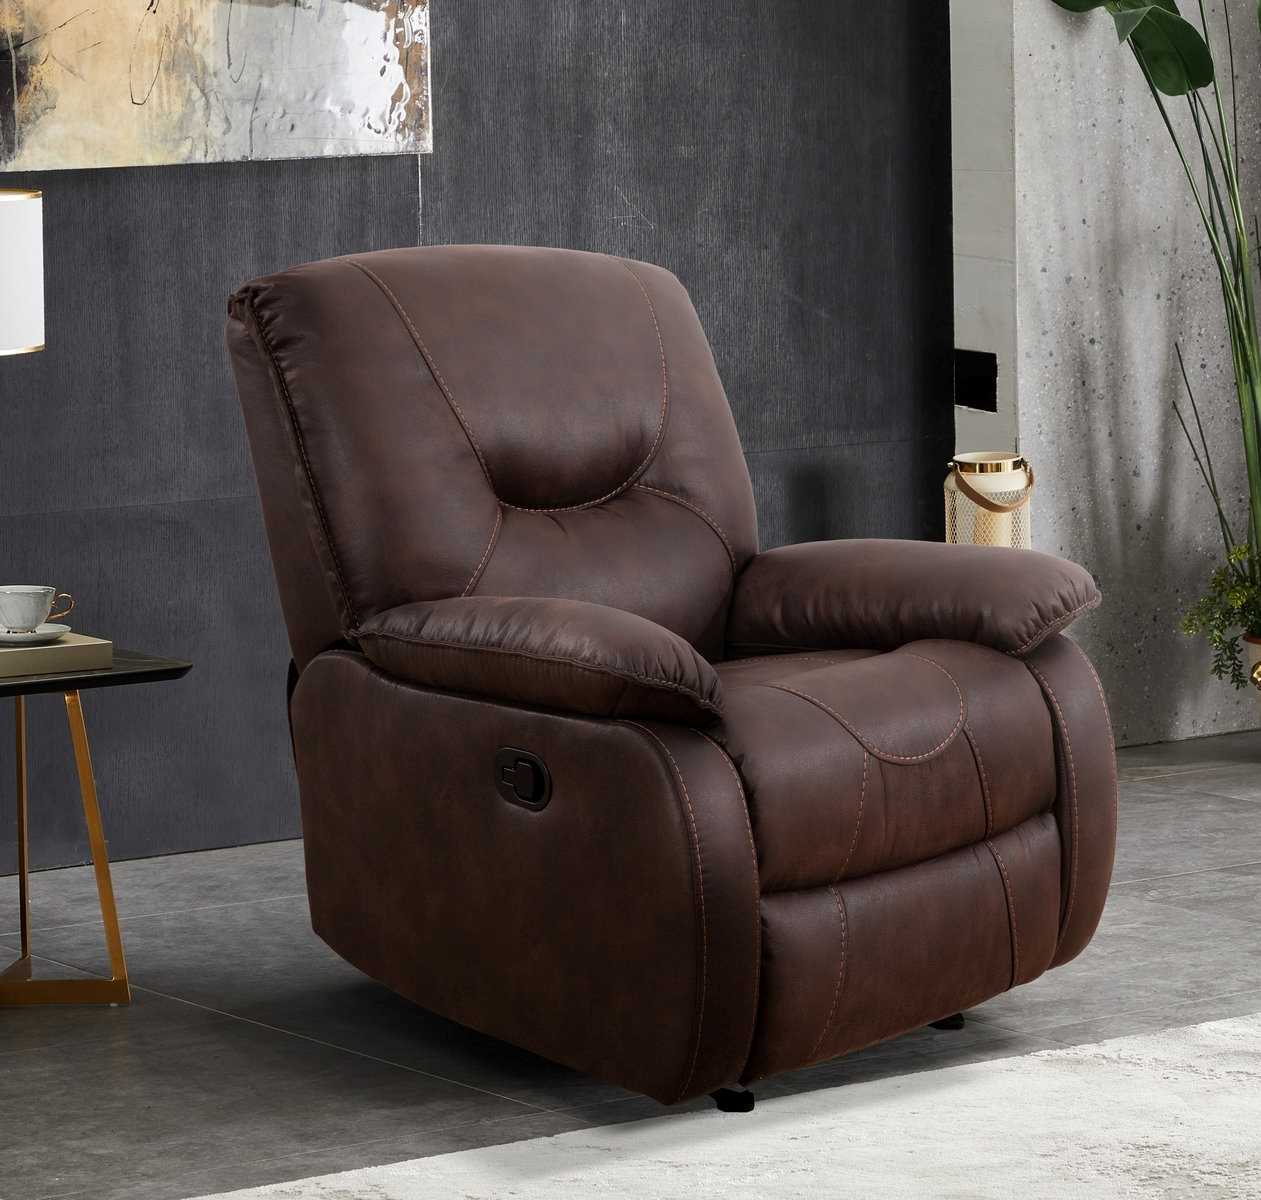 Recliner Chair Brown Elephant Skin Fabric 6351